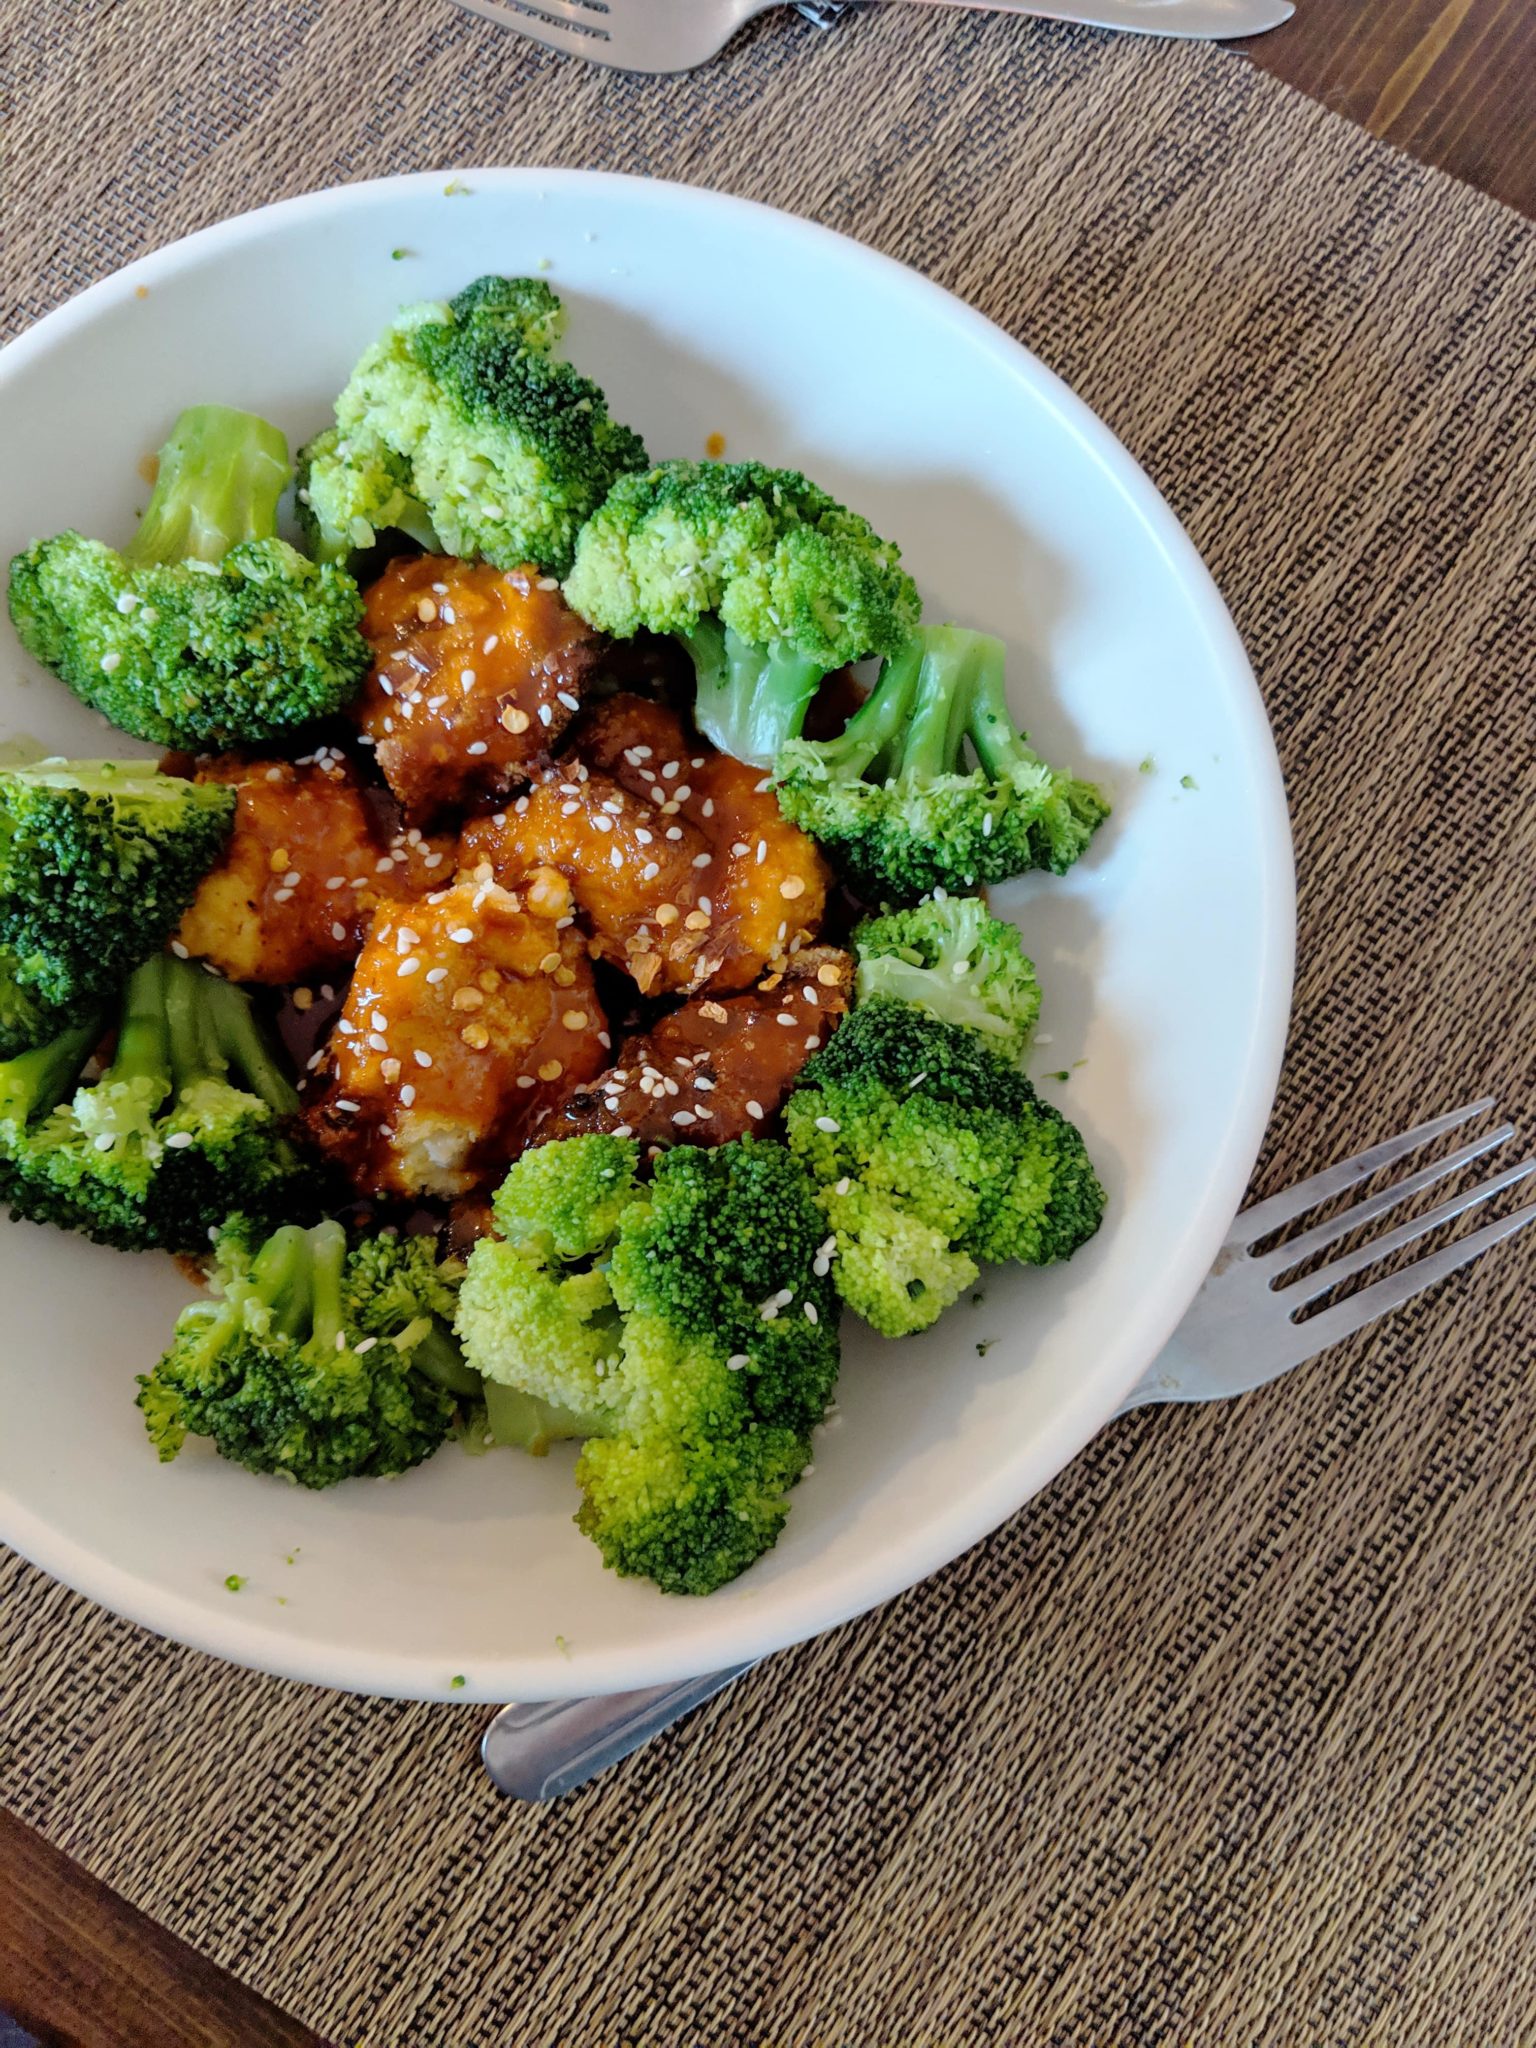 A Whole30 General Tso's Chicken that will fool you into thinking it isn't healthful! This recipe is also ketogenic, grain-free, low carb, and gluten free.